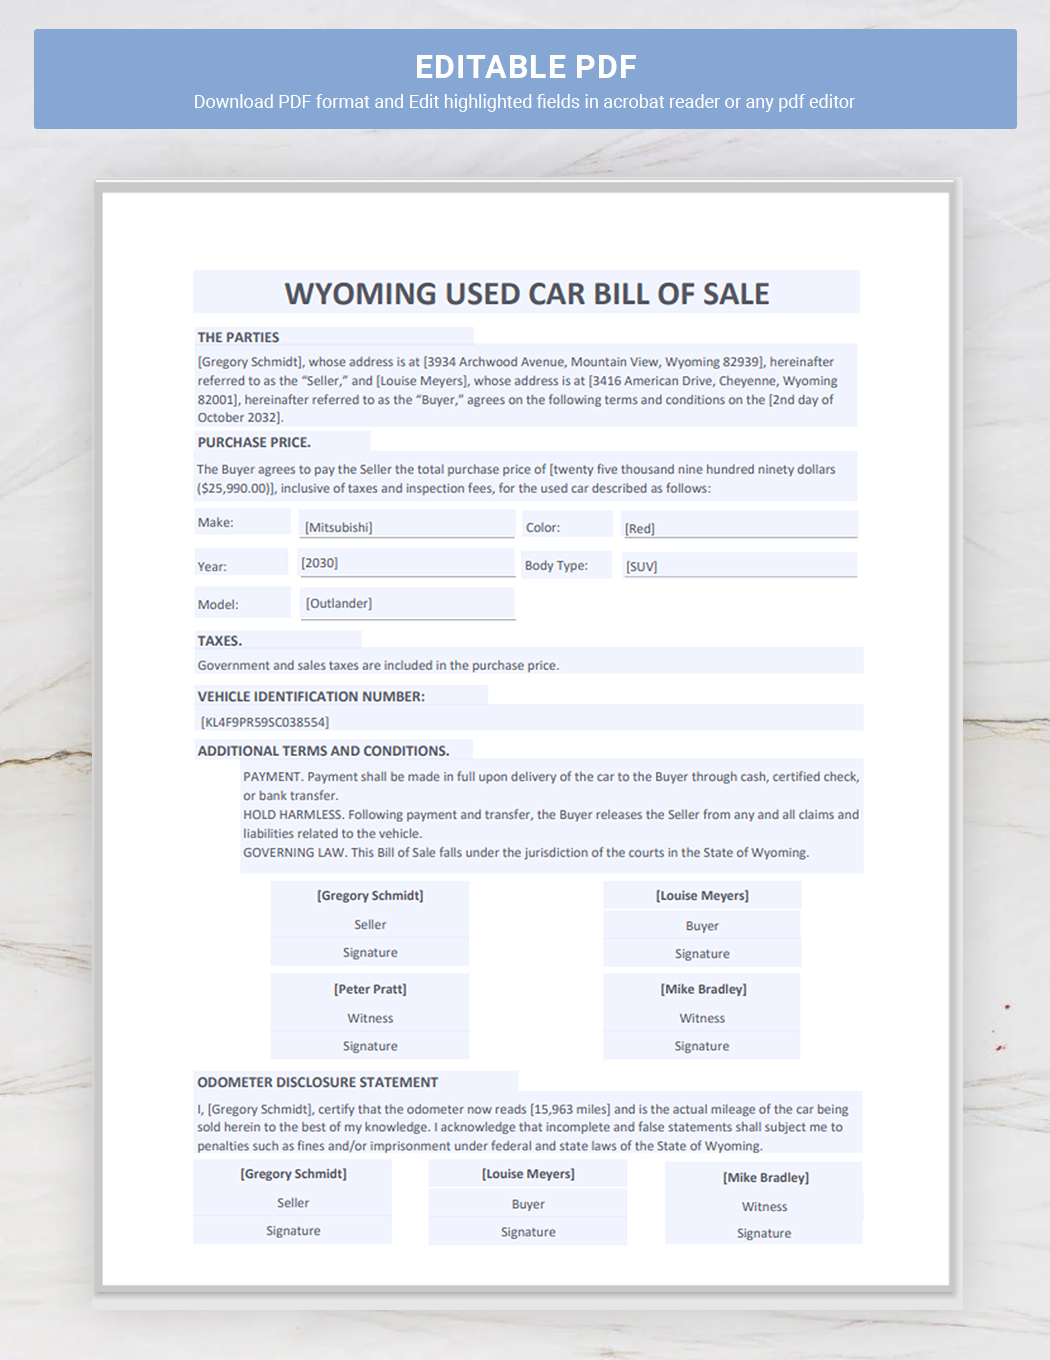 Wyoming Used Car Bill of Sale Template